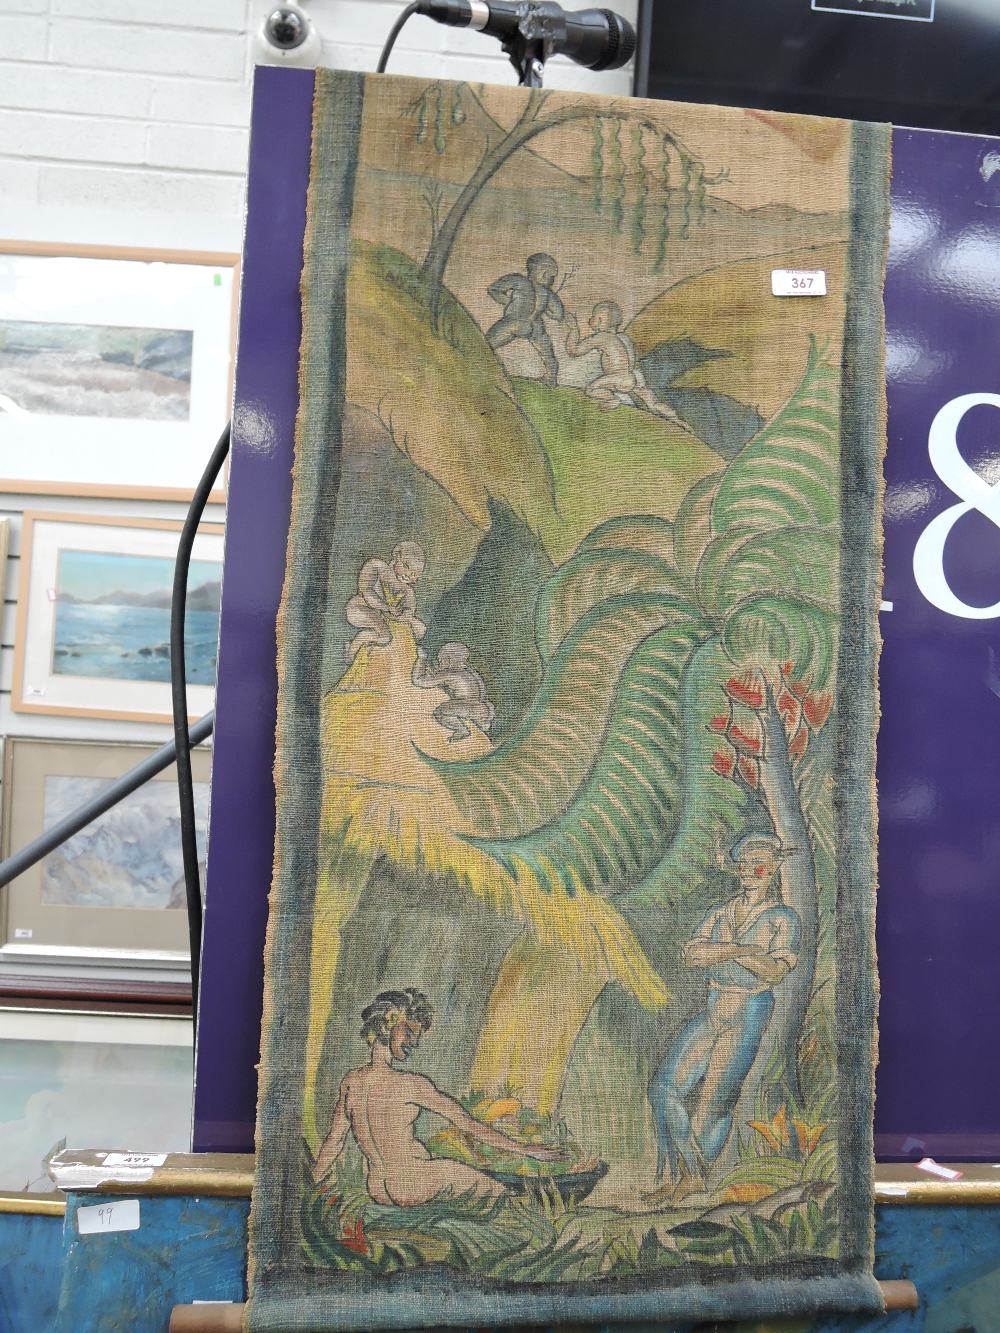 A vintage hand painted canvas scroll possibly with homo erotic imagery